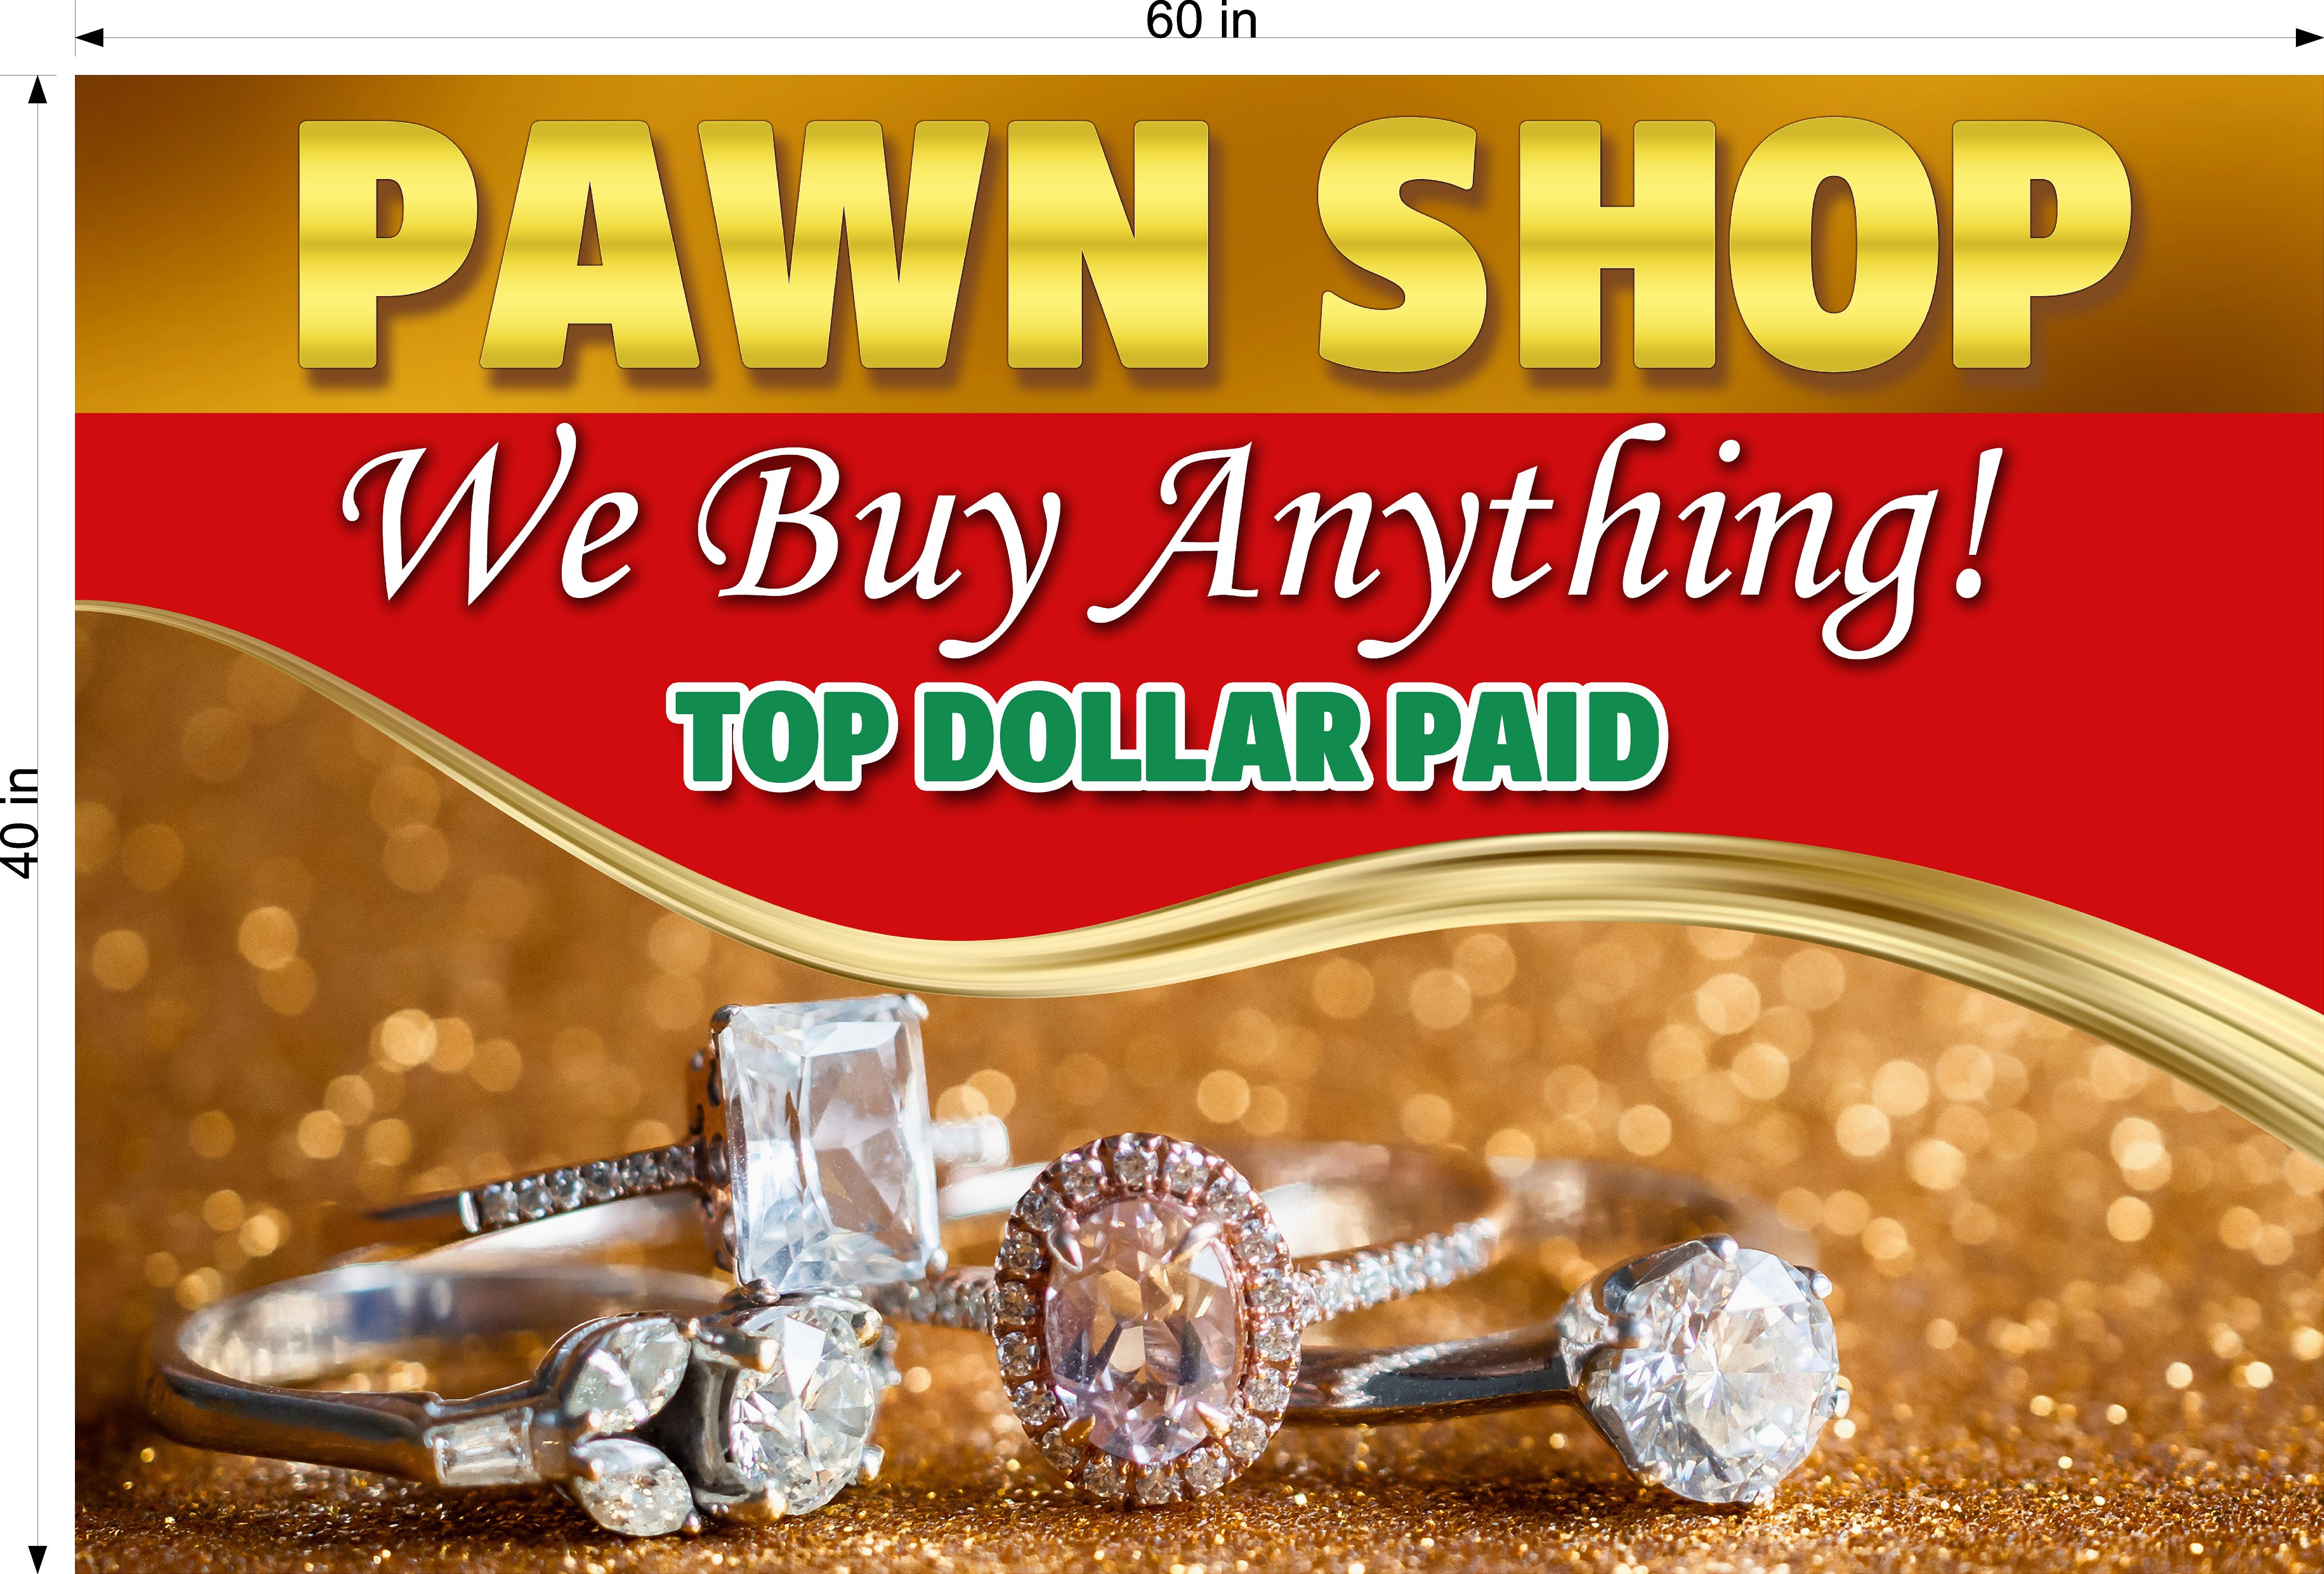 Pawn Shop 09 Perforated Mesh One Way Vision See Through Window Vinyl Buy Gold Silver Jewelry Sign Salon Horizontal